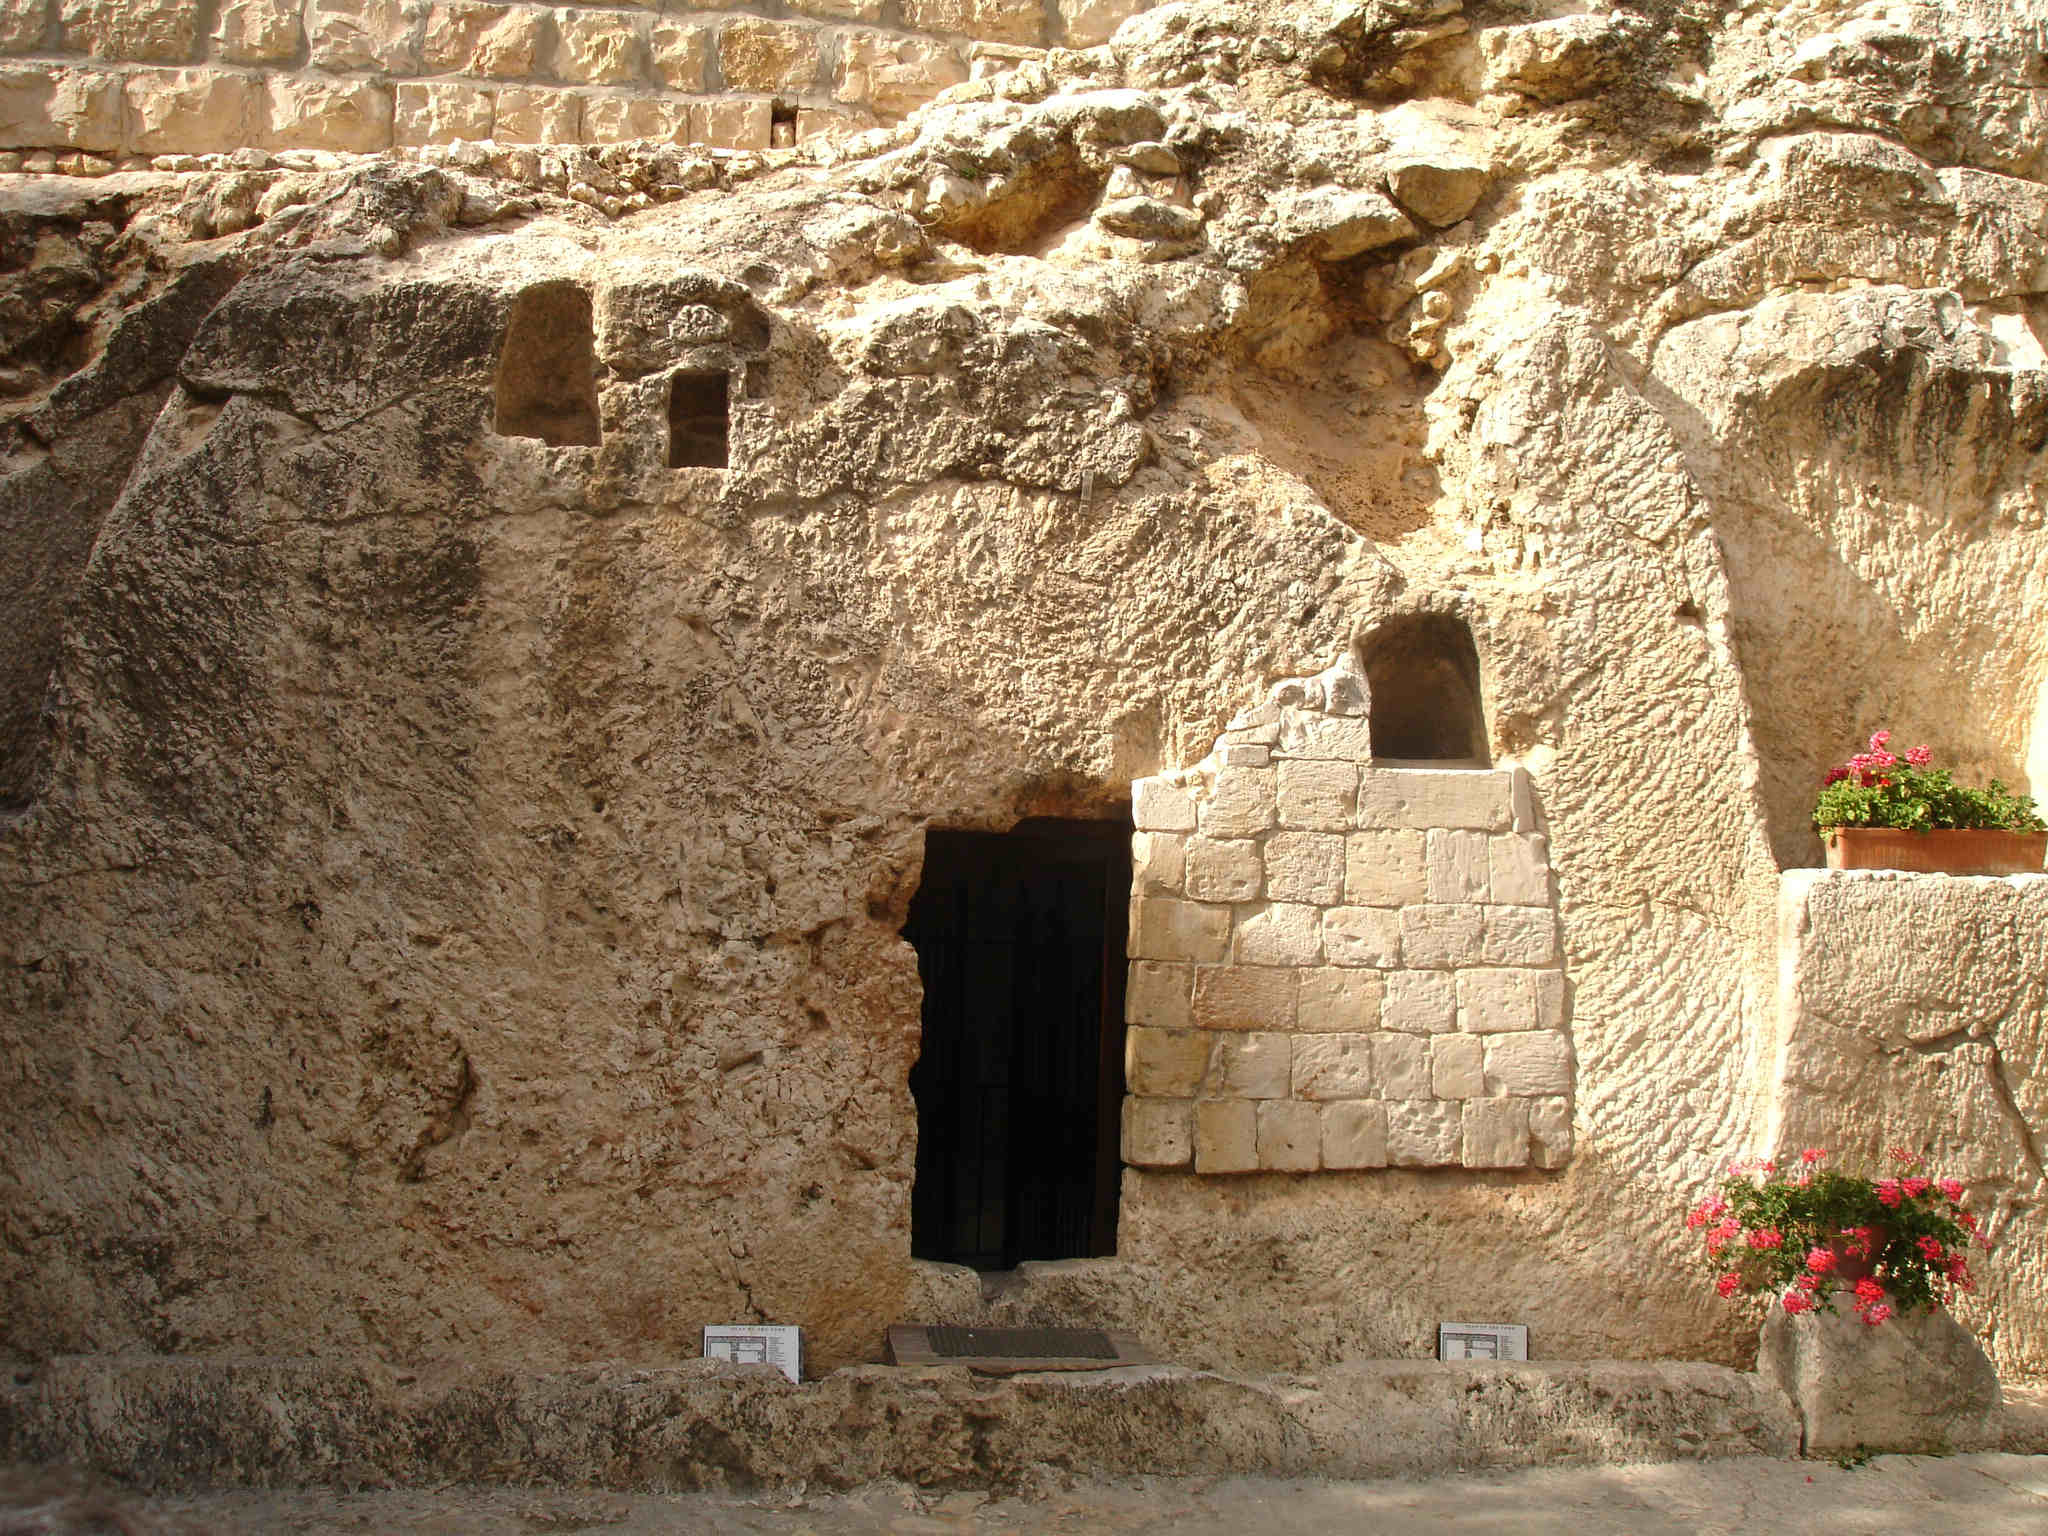 A tour inside the burial site of Jesus Christ, the Garden ...